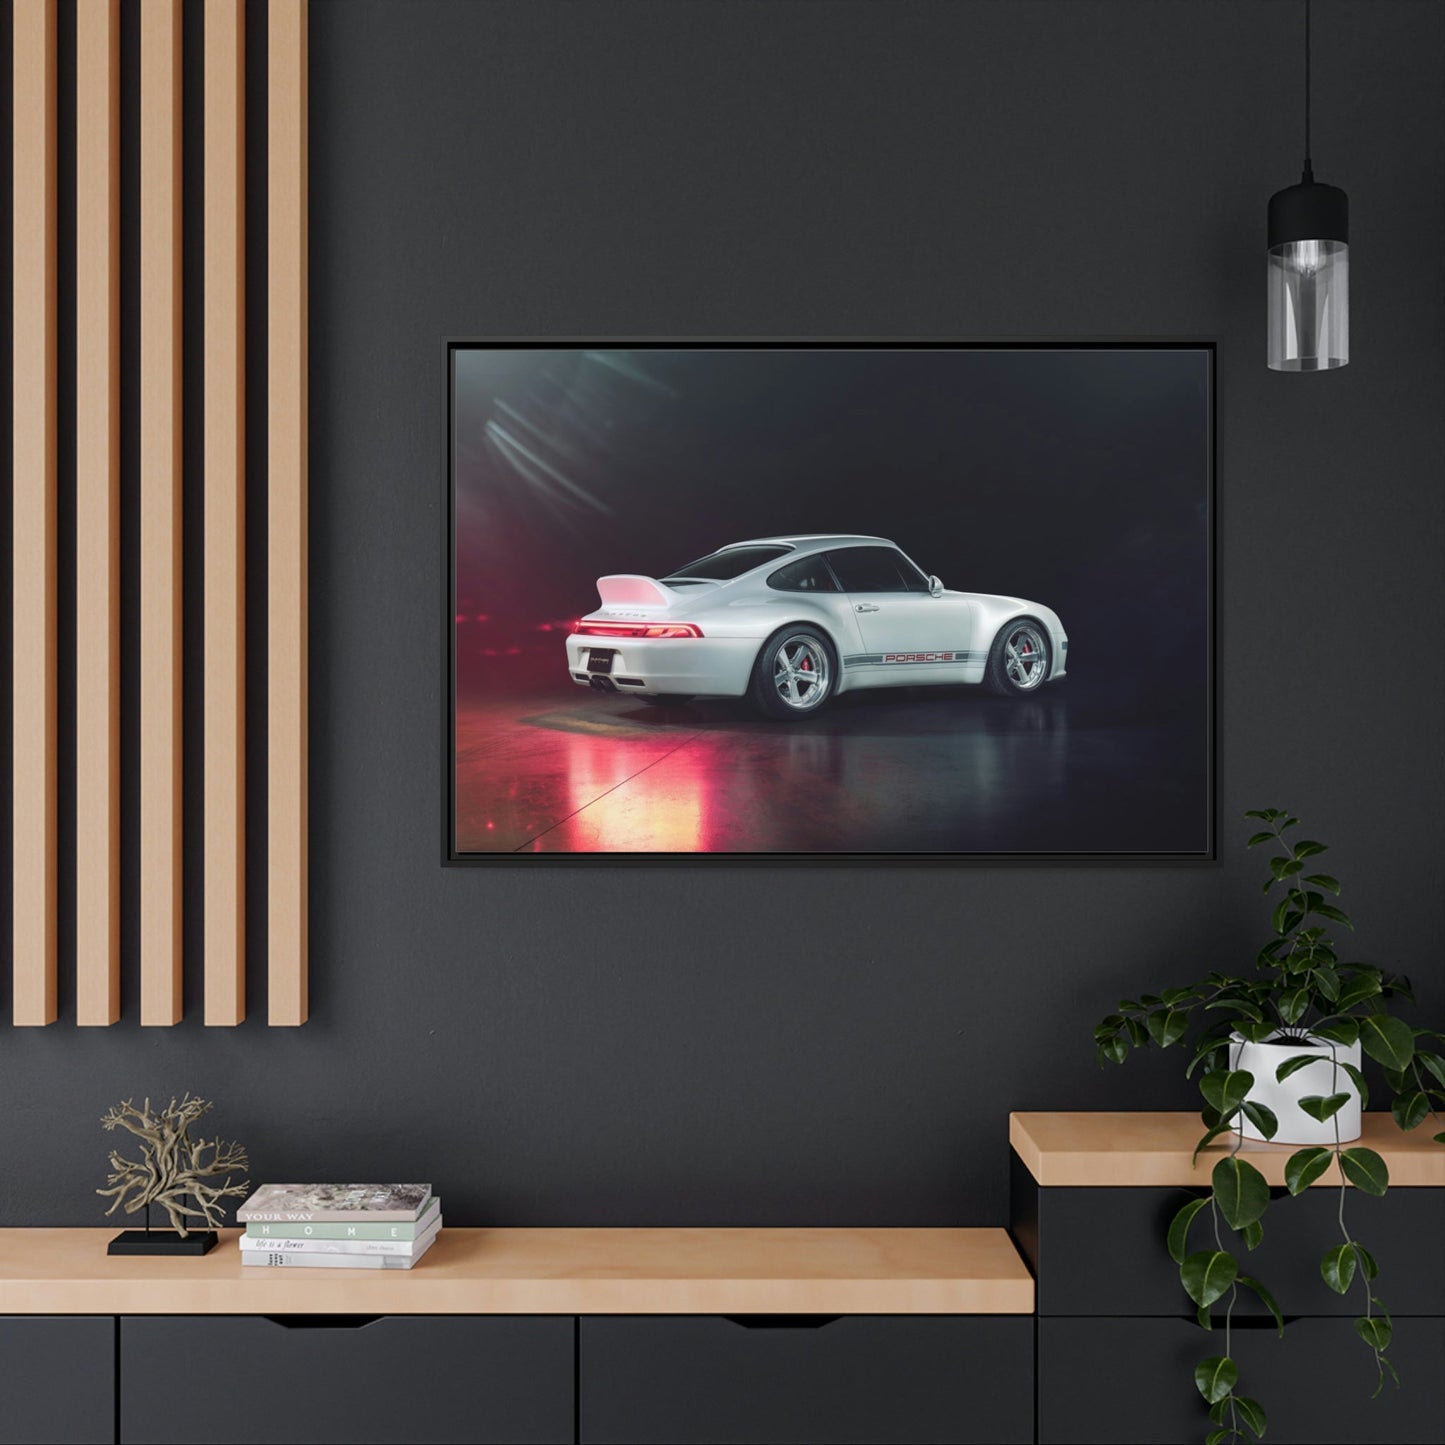 Porsche in Motion: Dynamic Print on Canvas for Racing Fans